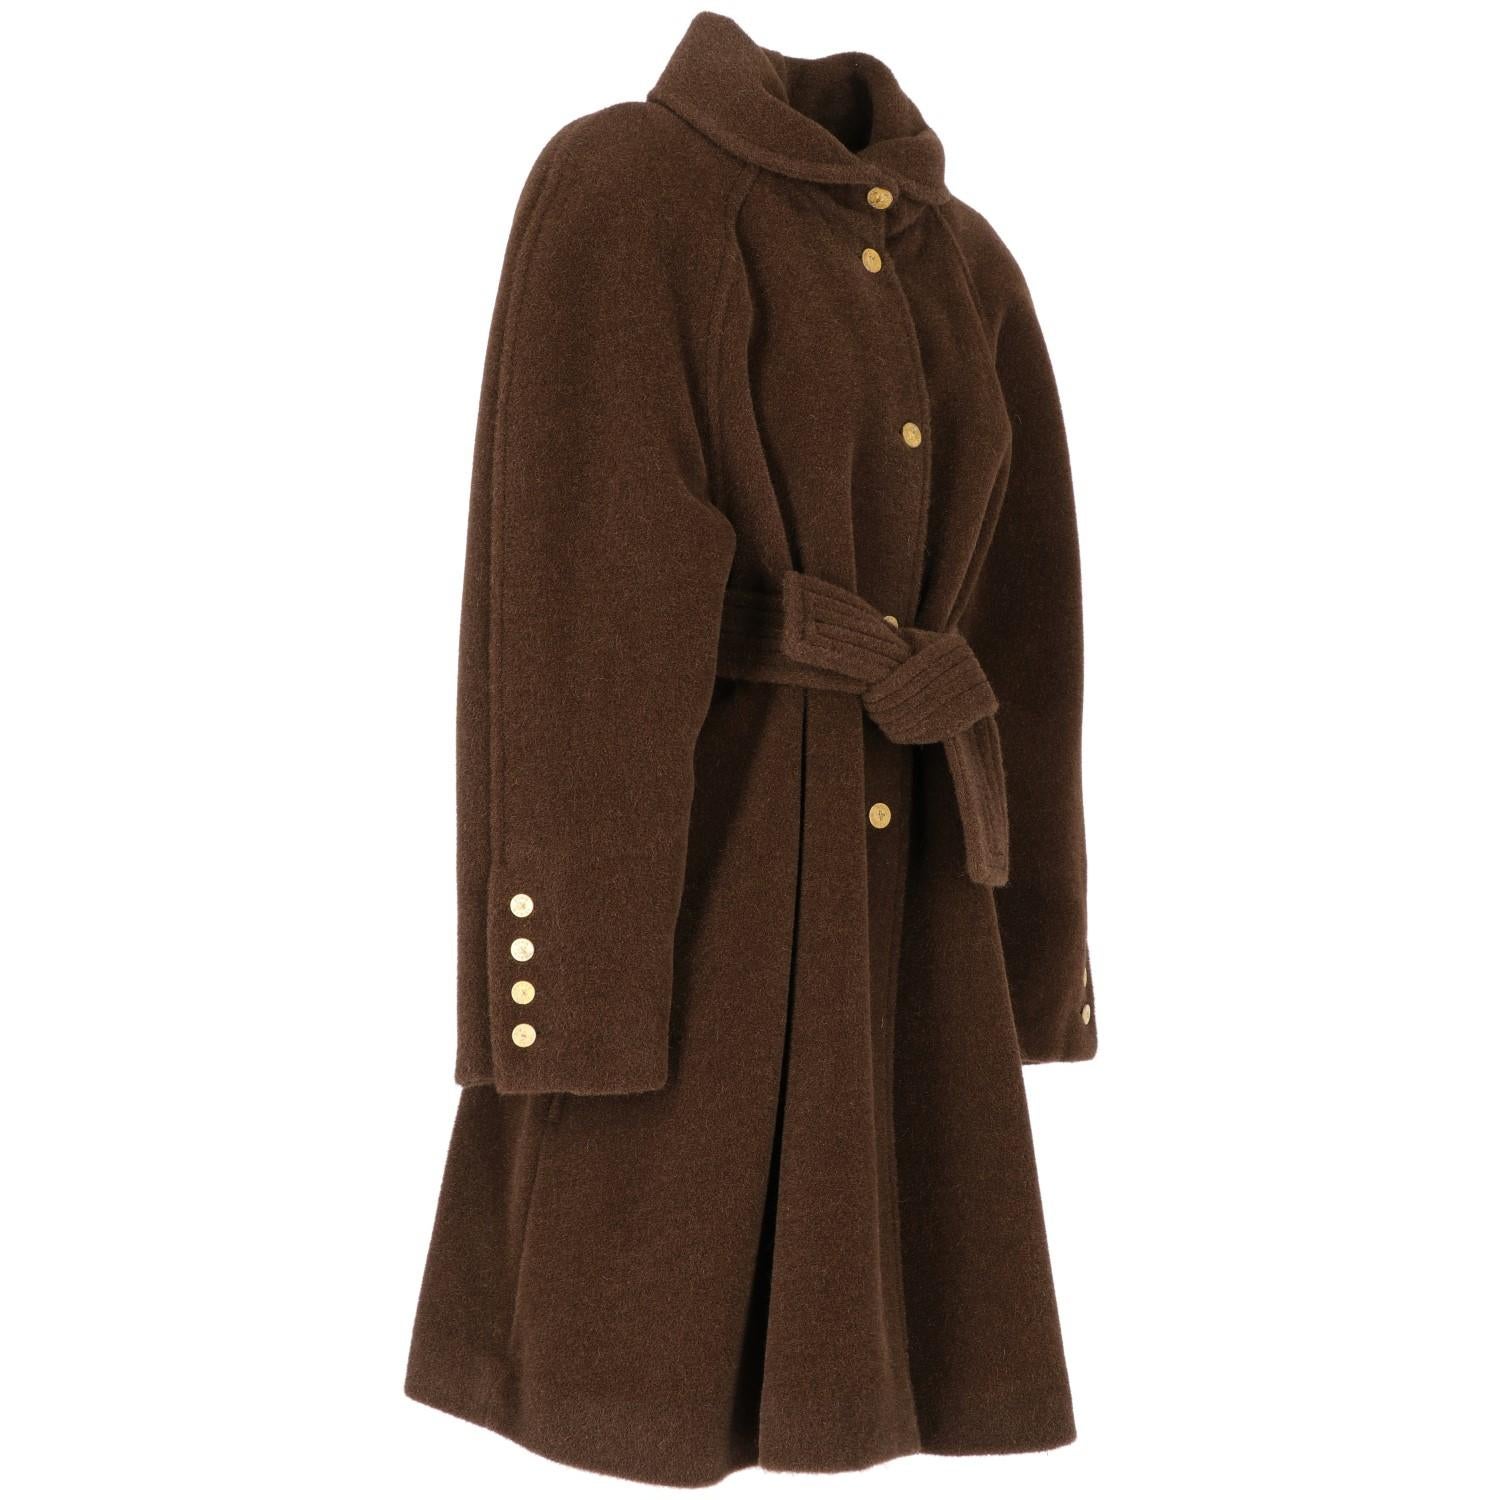 The Sonia Rykiel brown alpaca wool classic collar coat features raglan sleeves, front fastening and cuffs with branded gold tone metal buttons, side pockets and waist belt. This coat is in perfect conditions.

Years: 1980s

Made in France

Size: